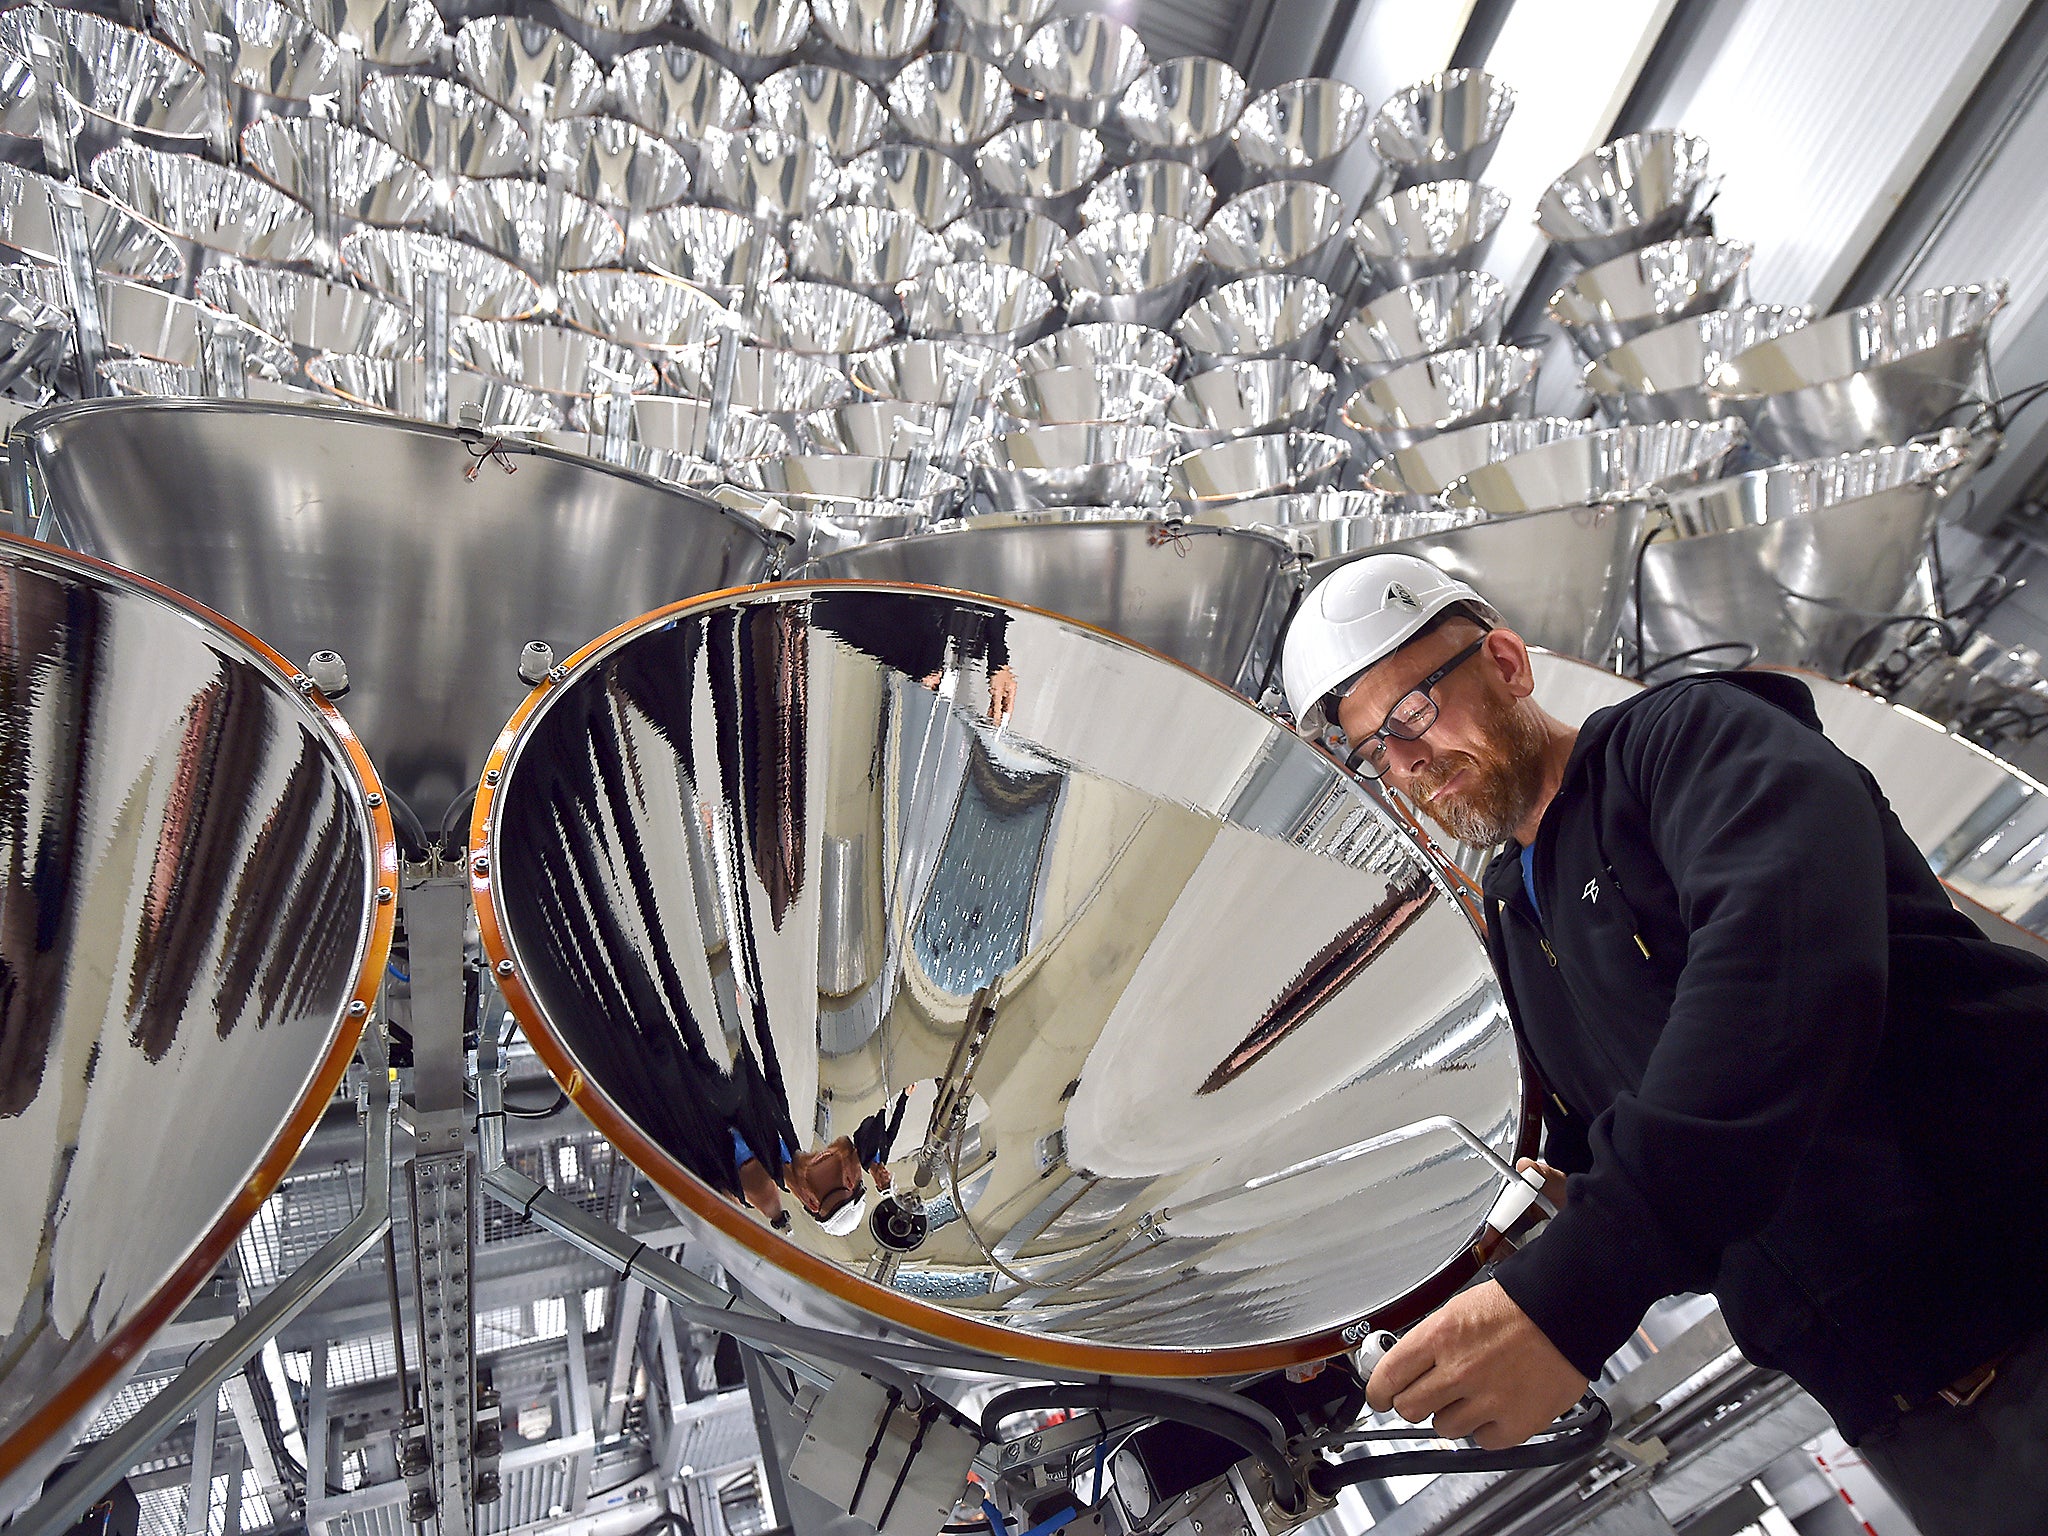 Photo engineer Volkmar Dohmen stands in front of xenon short-arc lamps in the DLR German national aeronautics and space research center in Juelich, western Germany